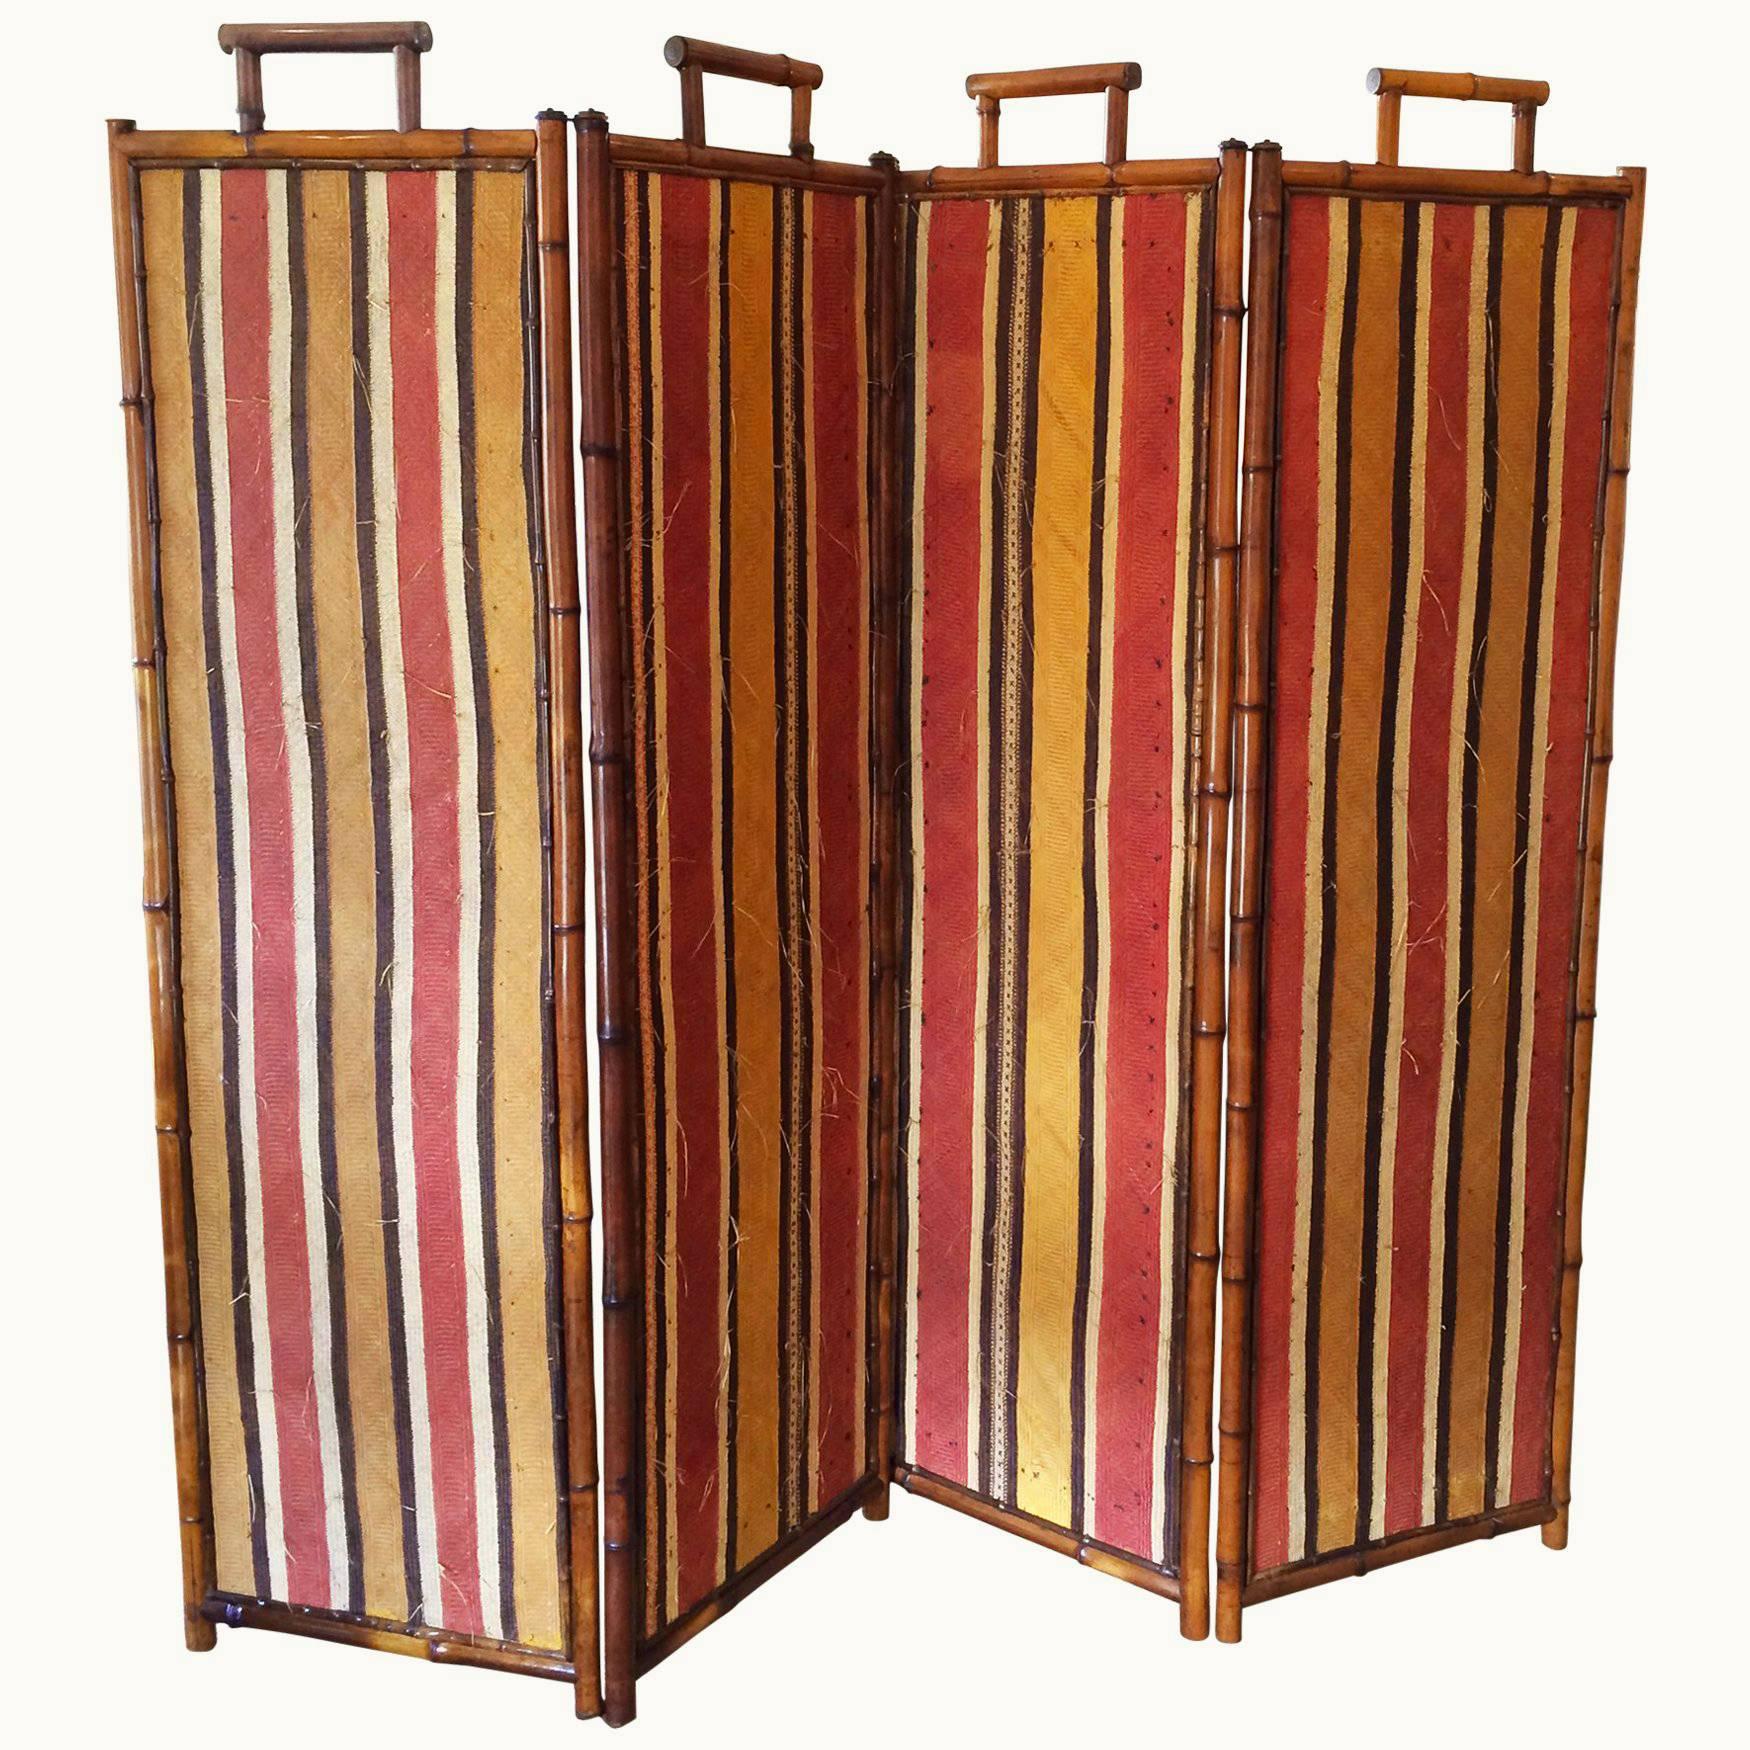 A very unusual four panel screen by Perret et Vibert; with woven hand painted striped straw panels on each side; framed in natural bamboo with designer's label, circa 1890.
Each panel is 19.75" W.